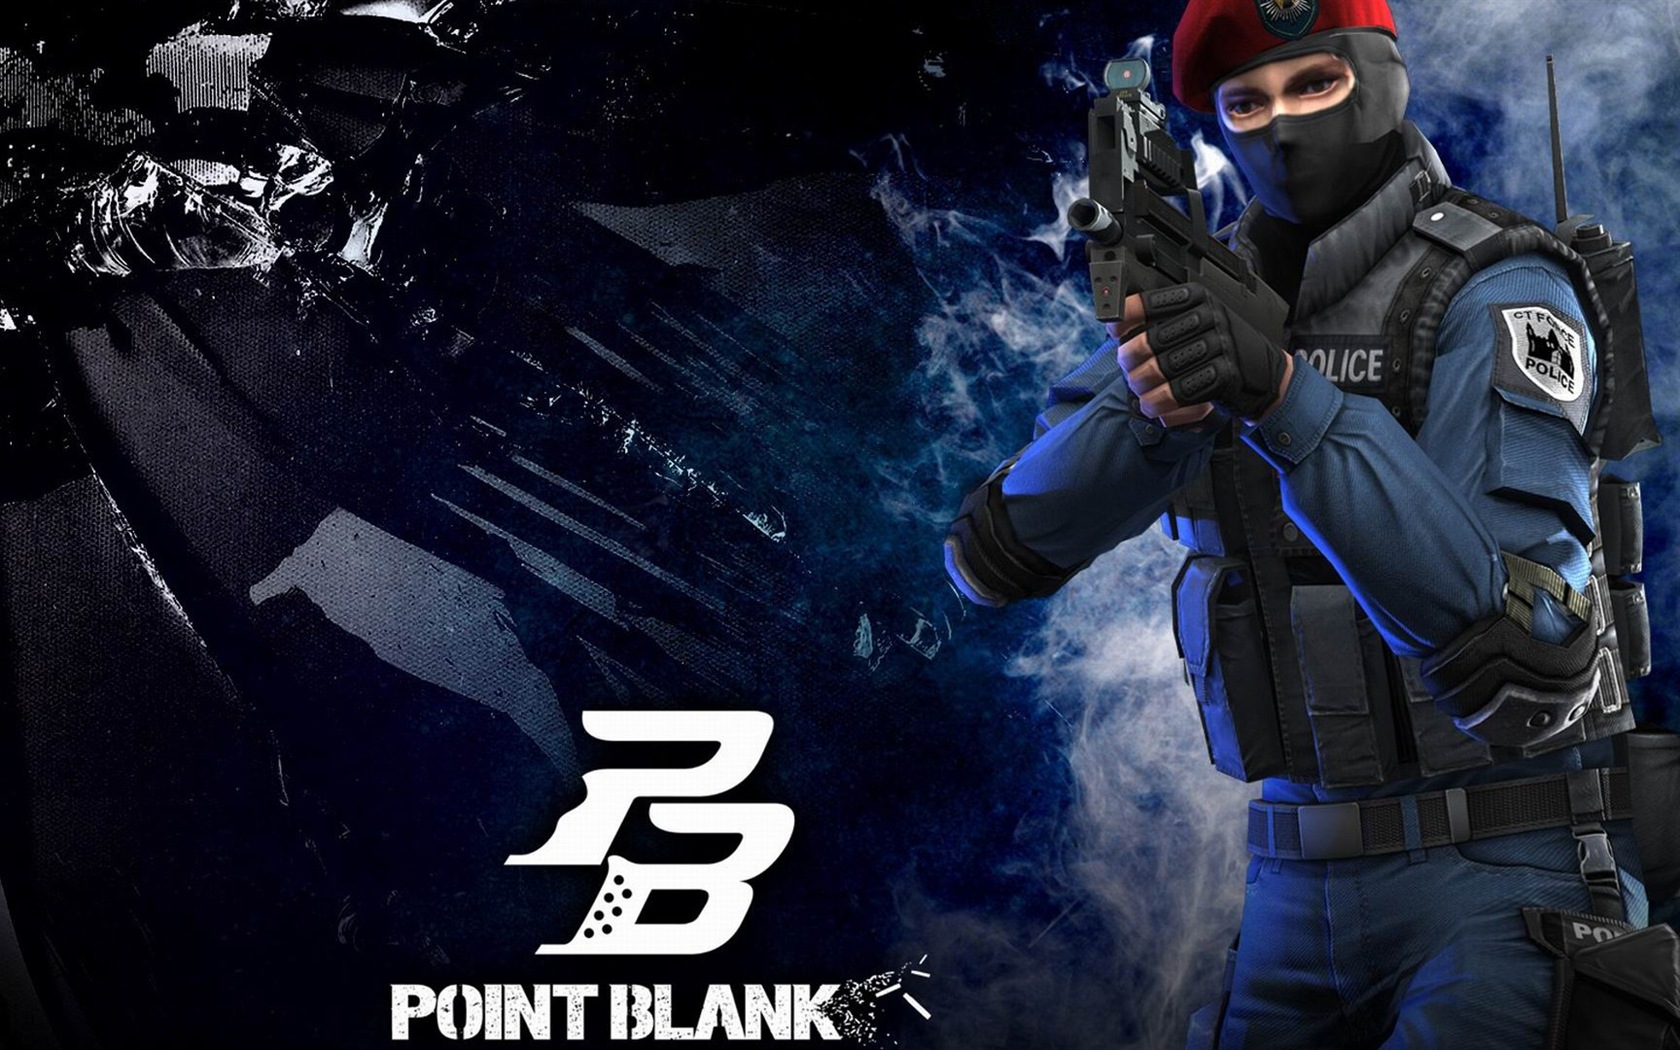 Point Blank HD game wallpapers #3 - 1680x1050